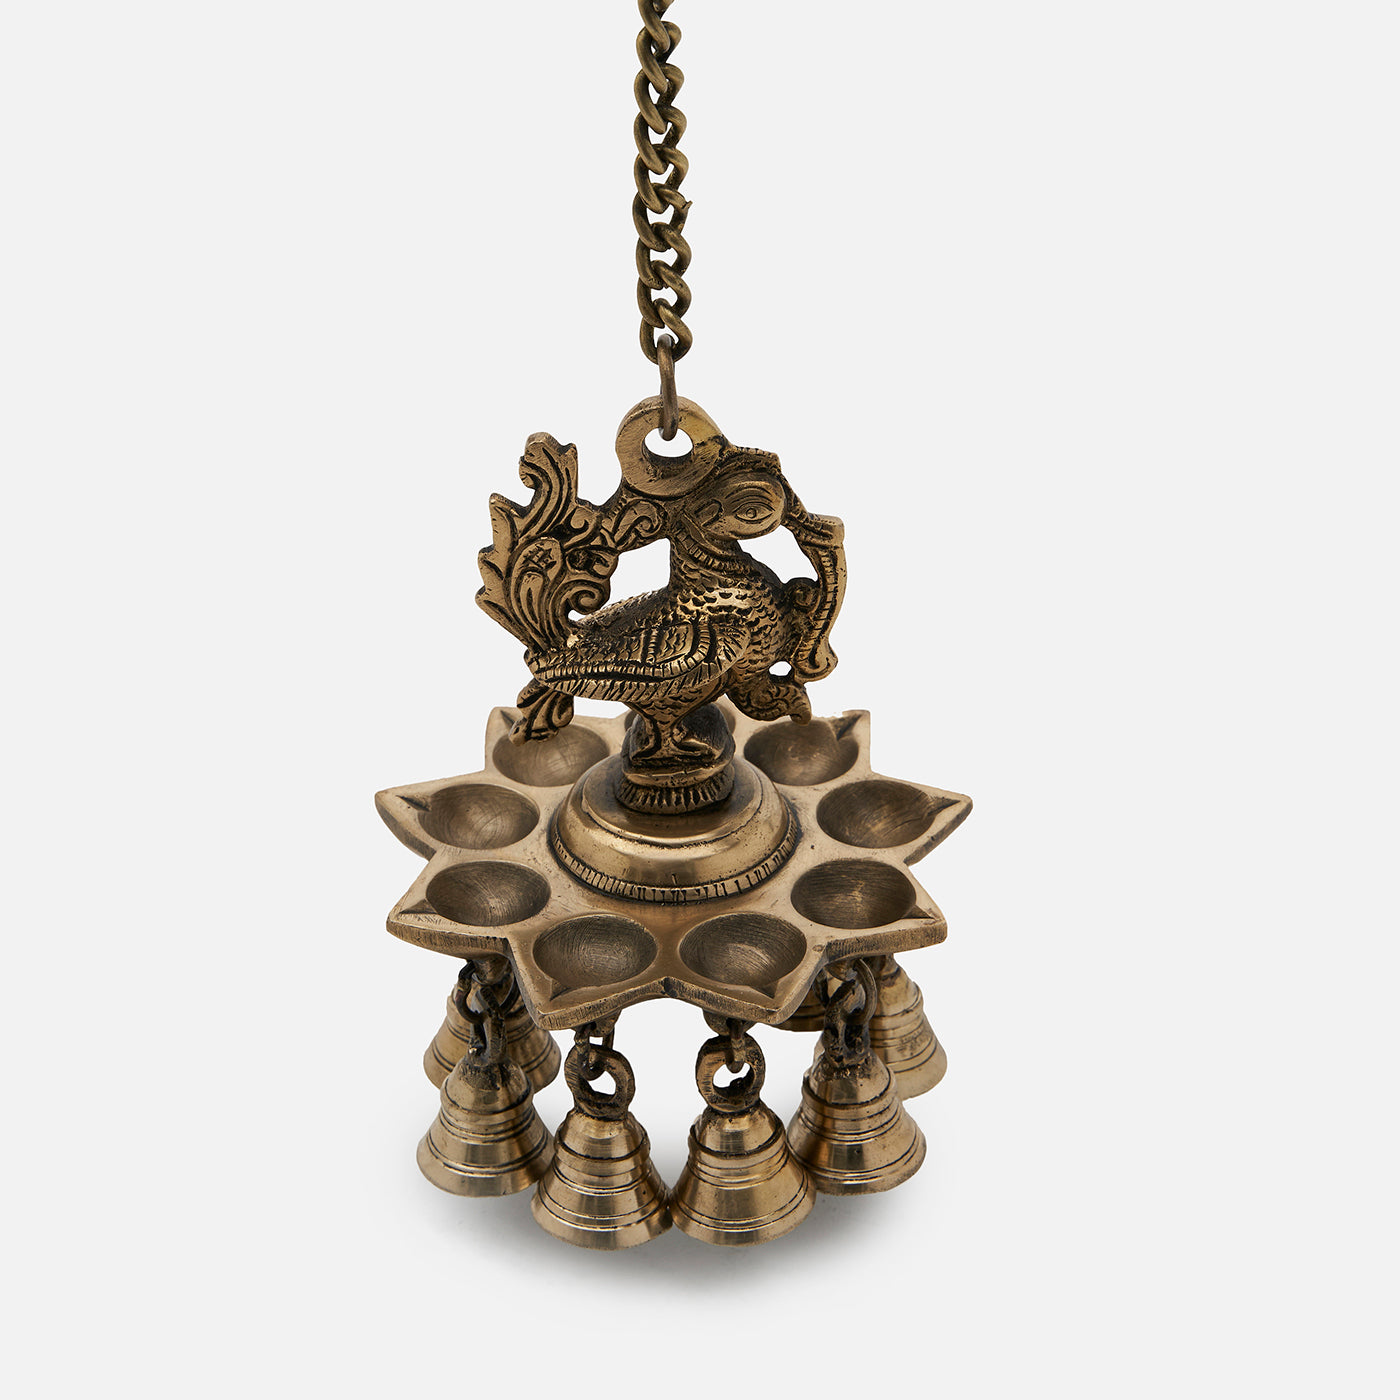 Brass Peacock Diya Bell with Chain Wall Hanging